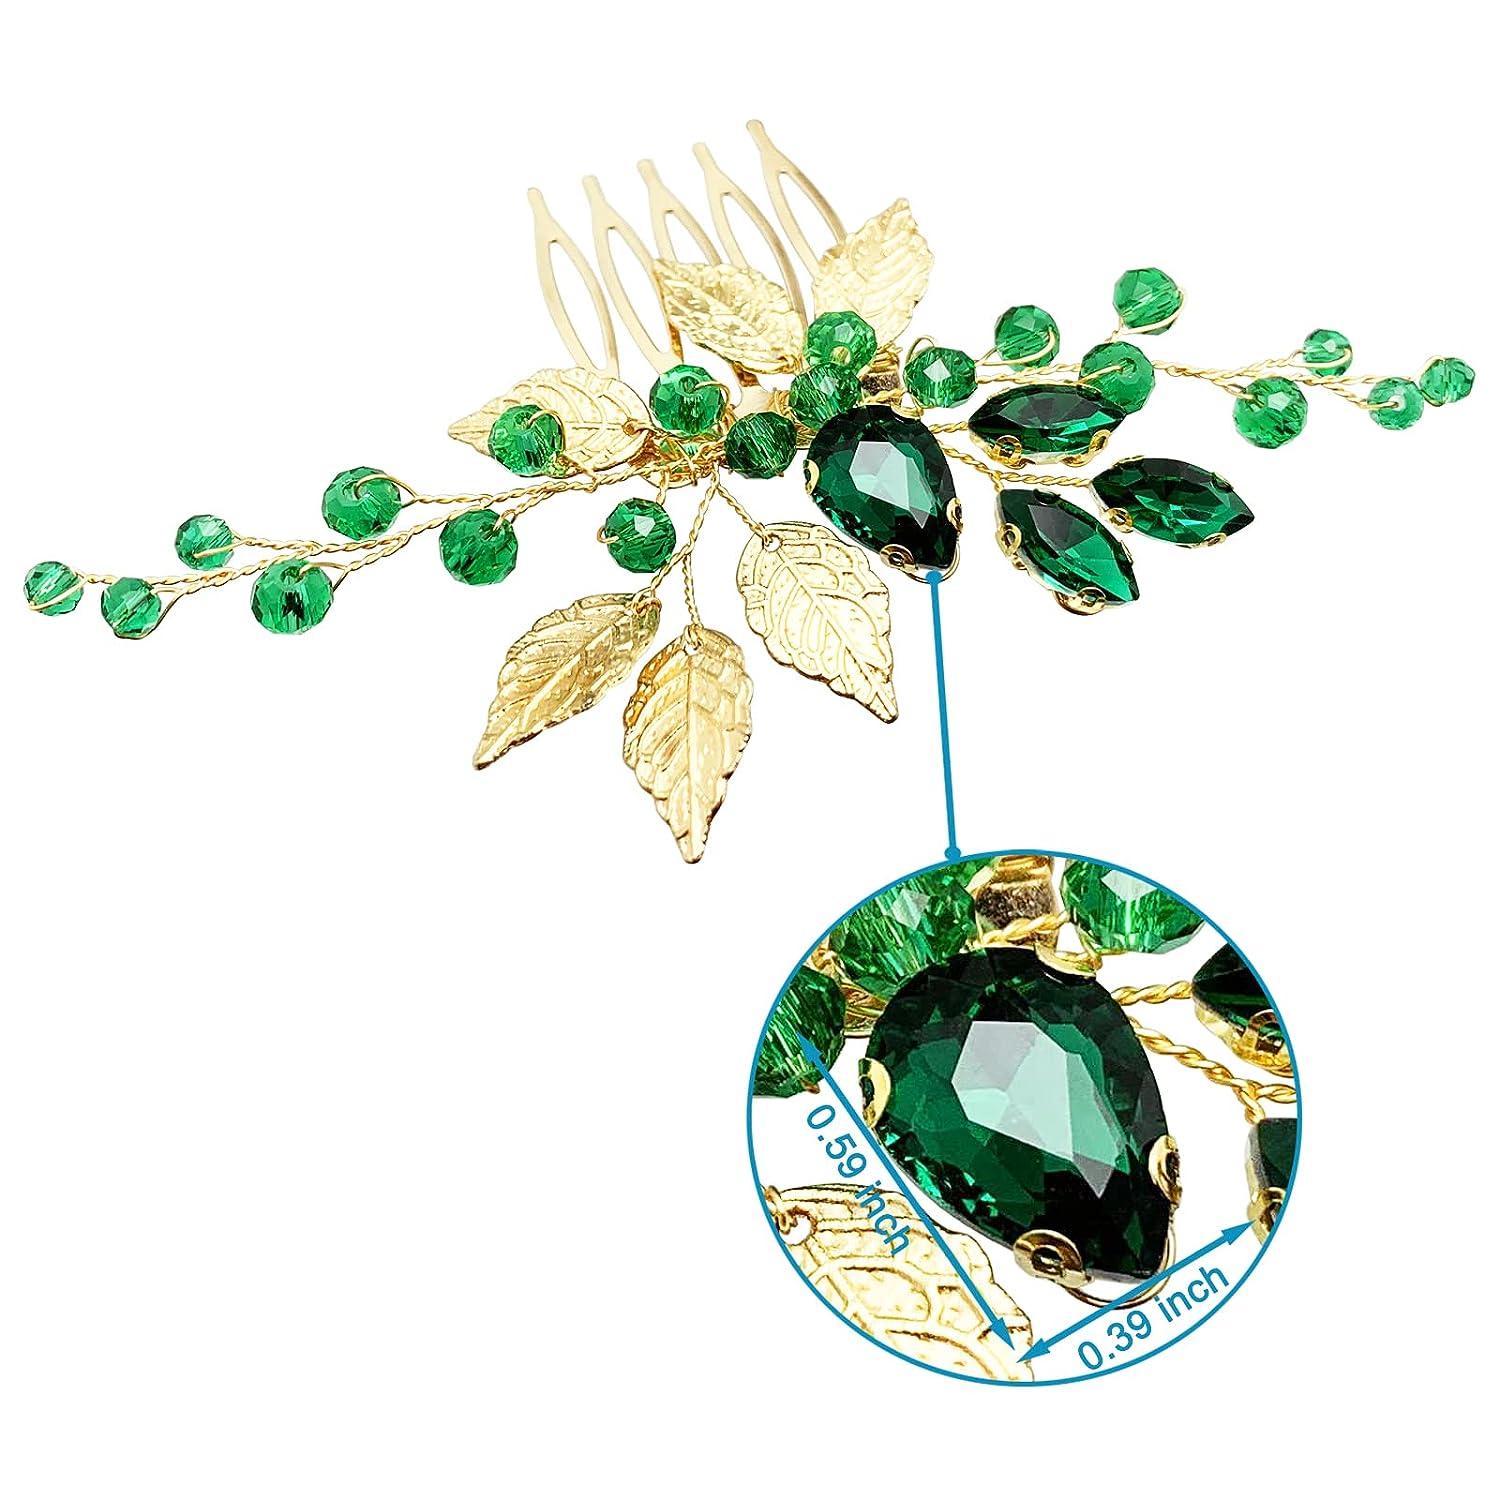 BETITETO Bridal Hair Comb Emerald Green Crystal Gold Leaf Vine Hair Piece  Accessories for Wedding Bride Women Party (Emerald Green)